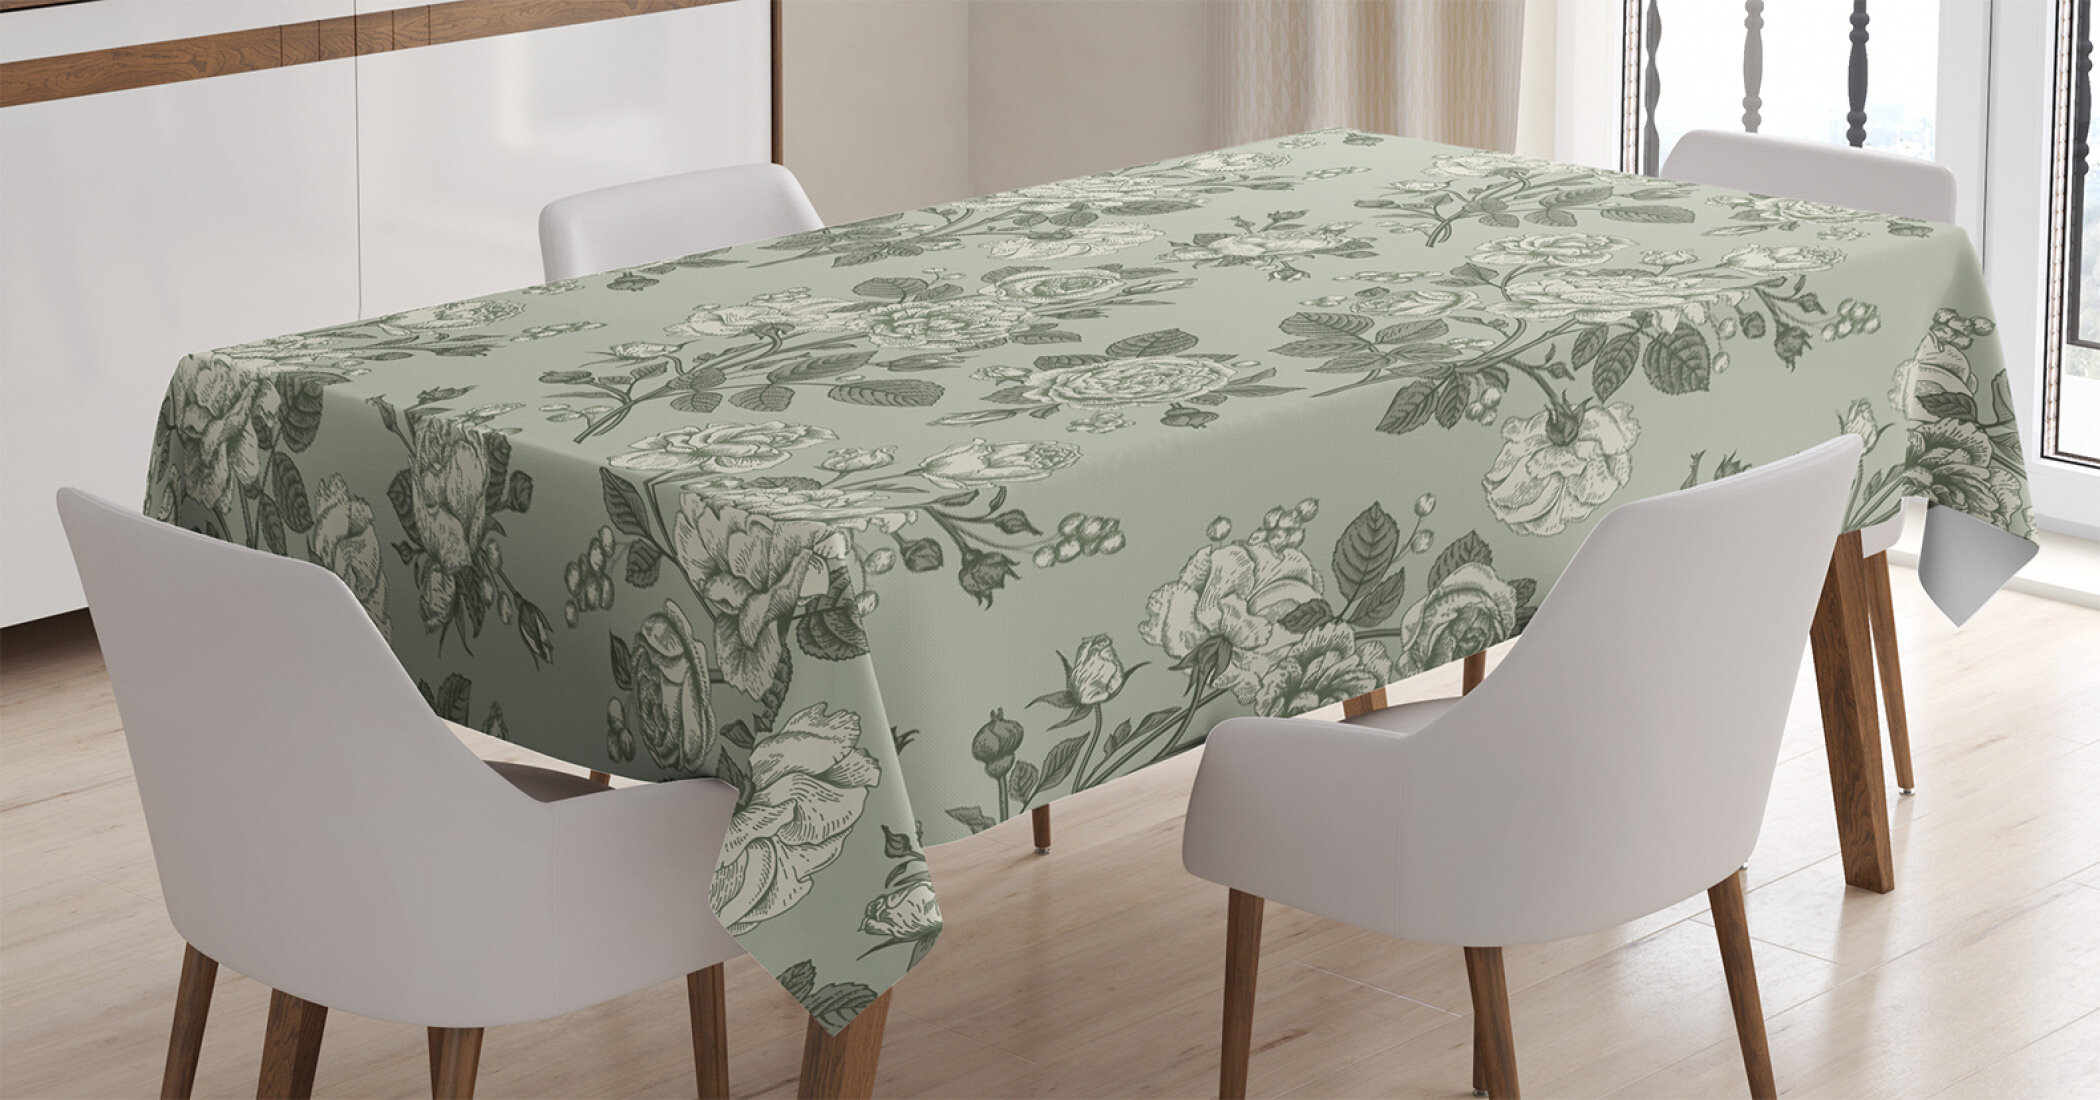 Ambesonne Colorful Nature Tablecloth Table Cover for Dining Room Kitchen